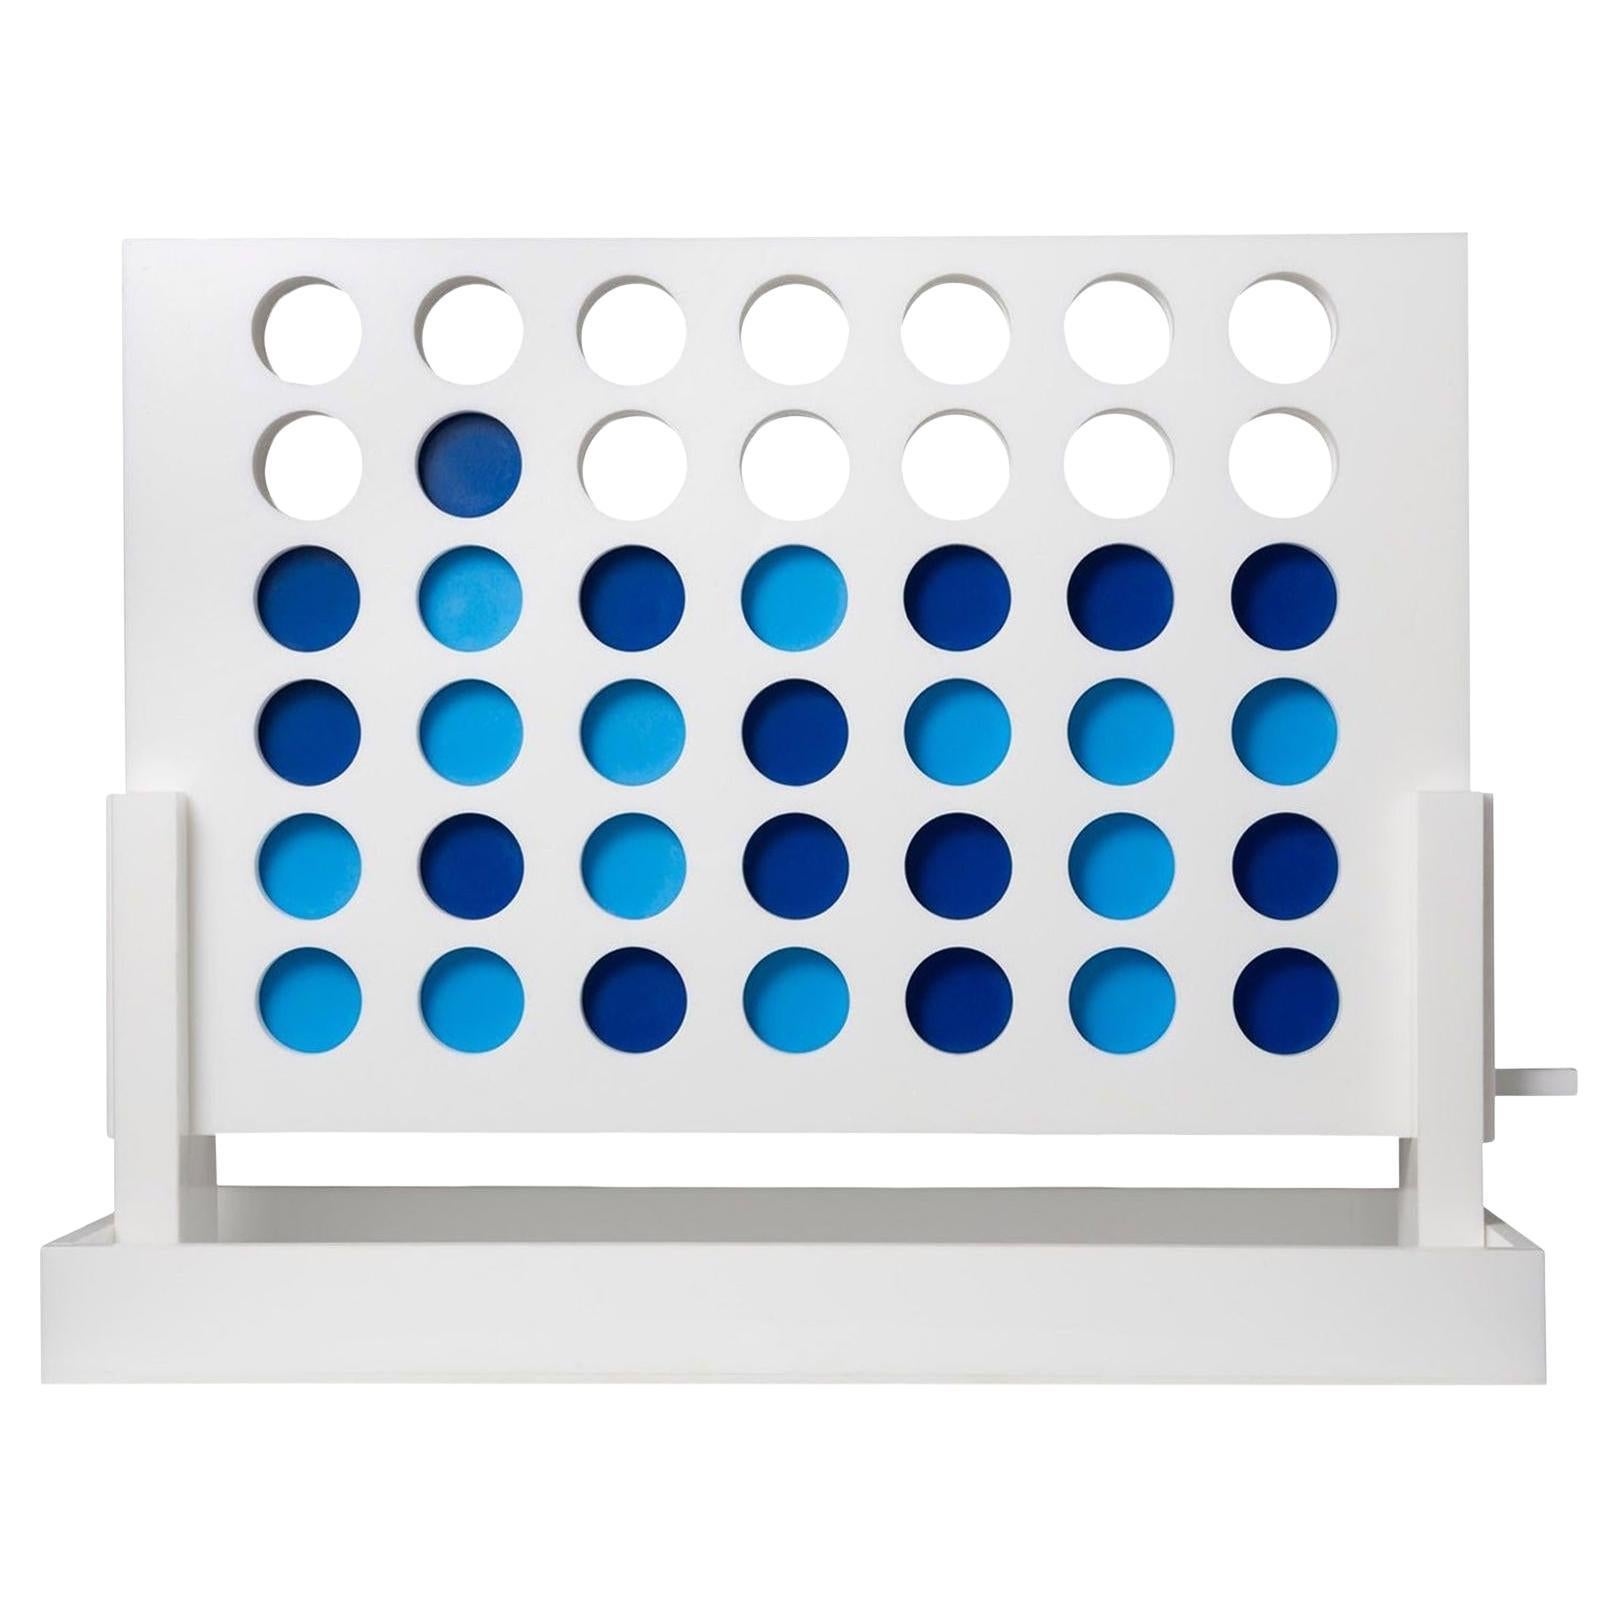 White and Blue Acrylic Connect Four Game For Sale